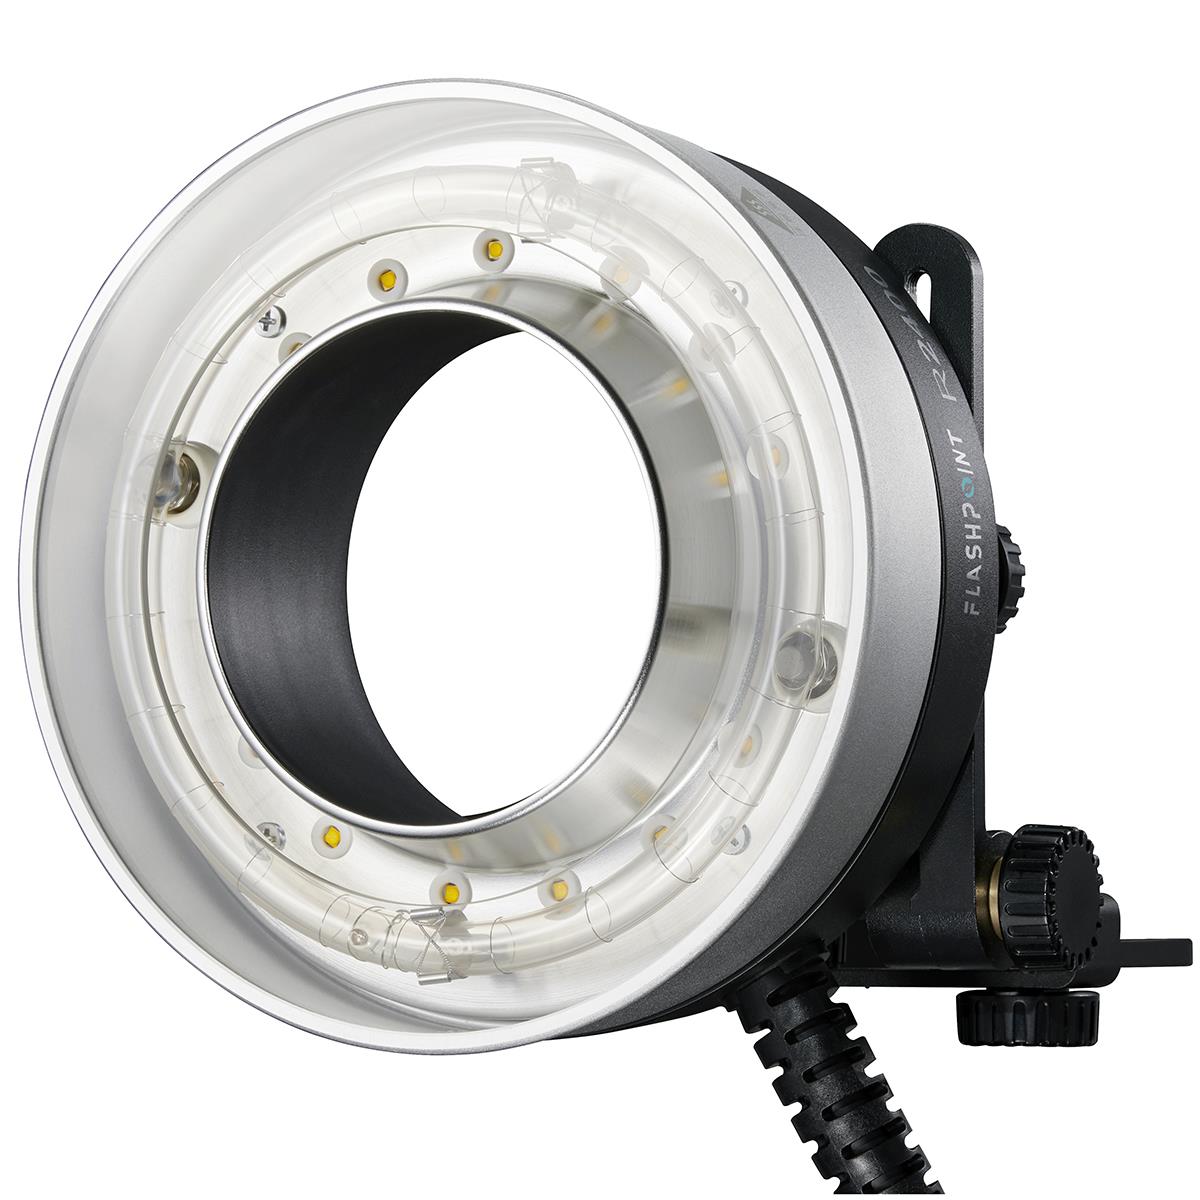 Image of Flashpoint R2400 Ring Flash Head for P2400